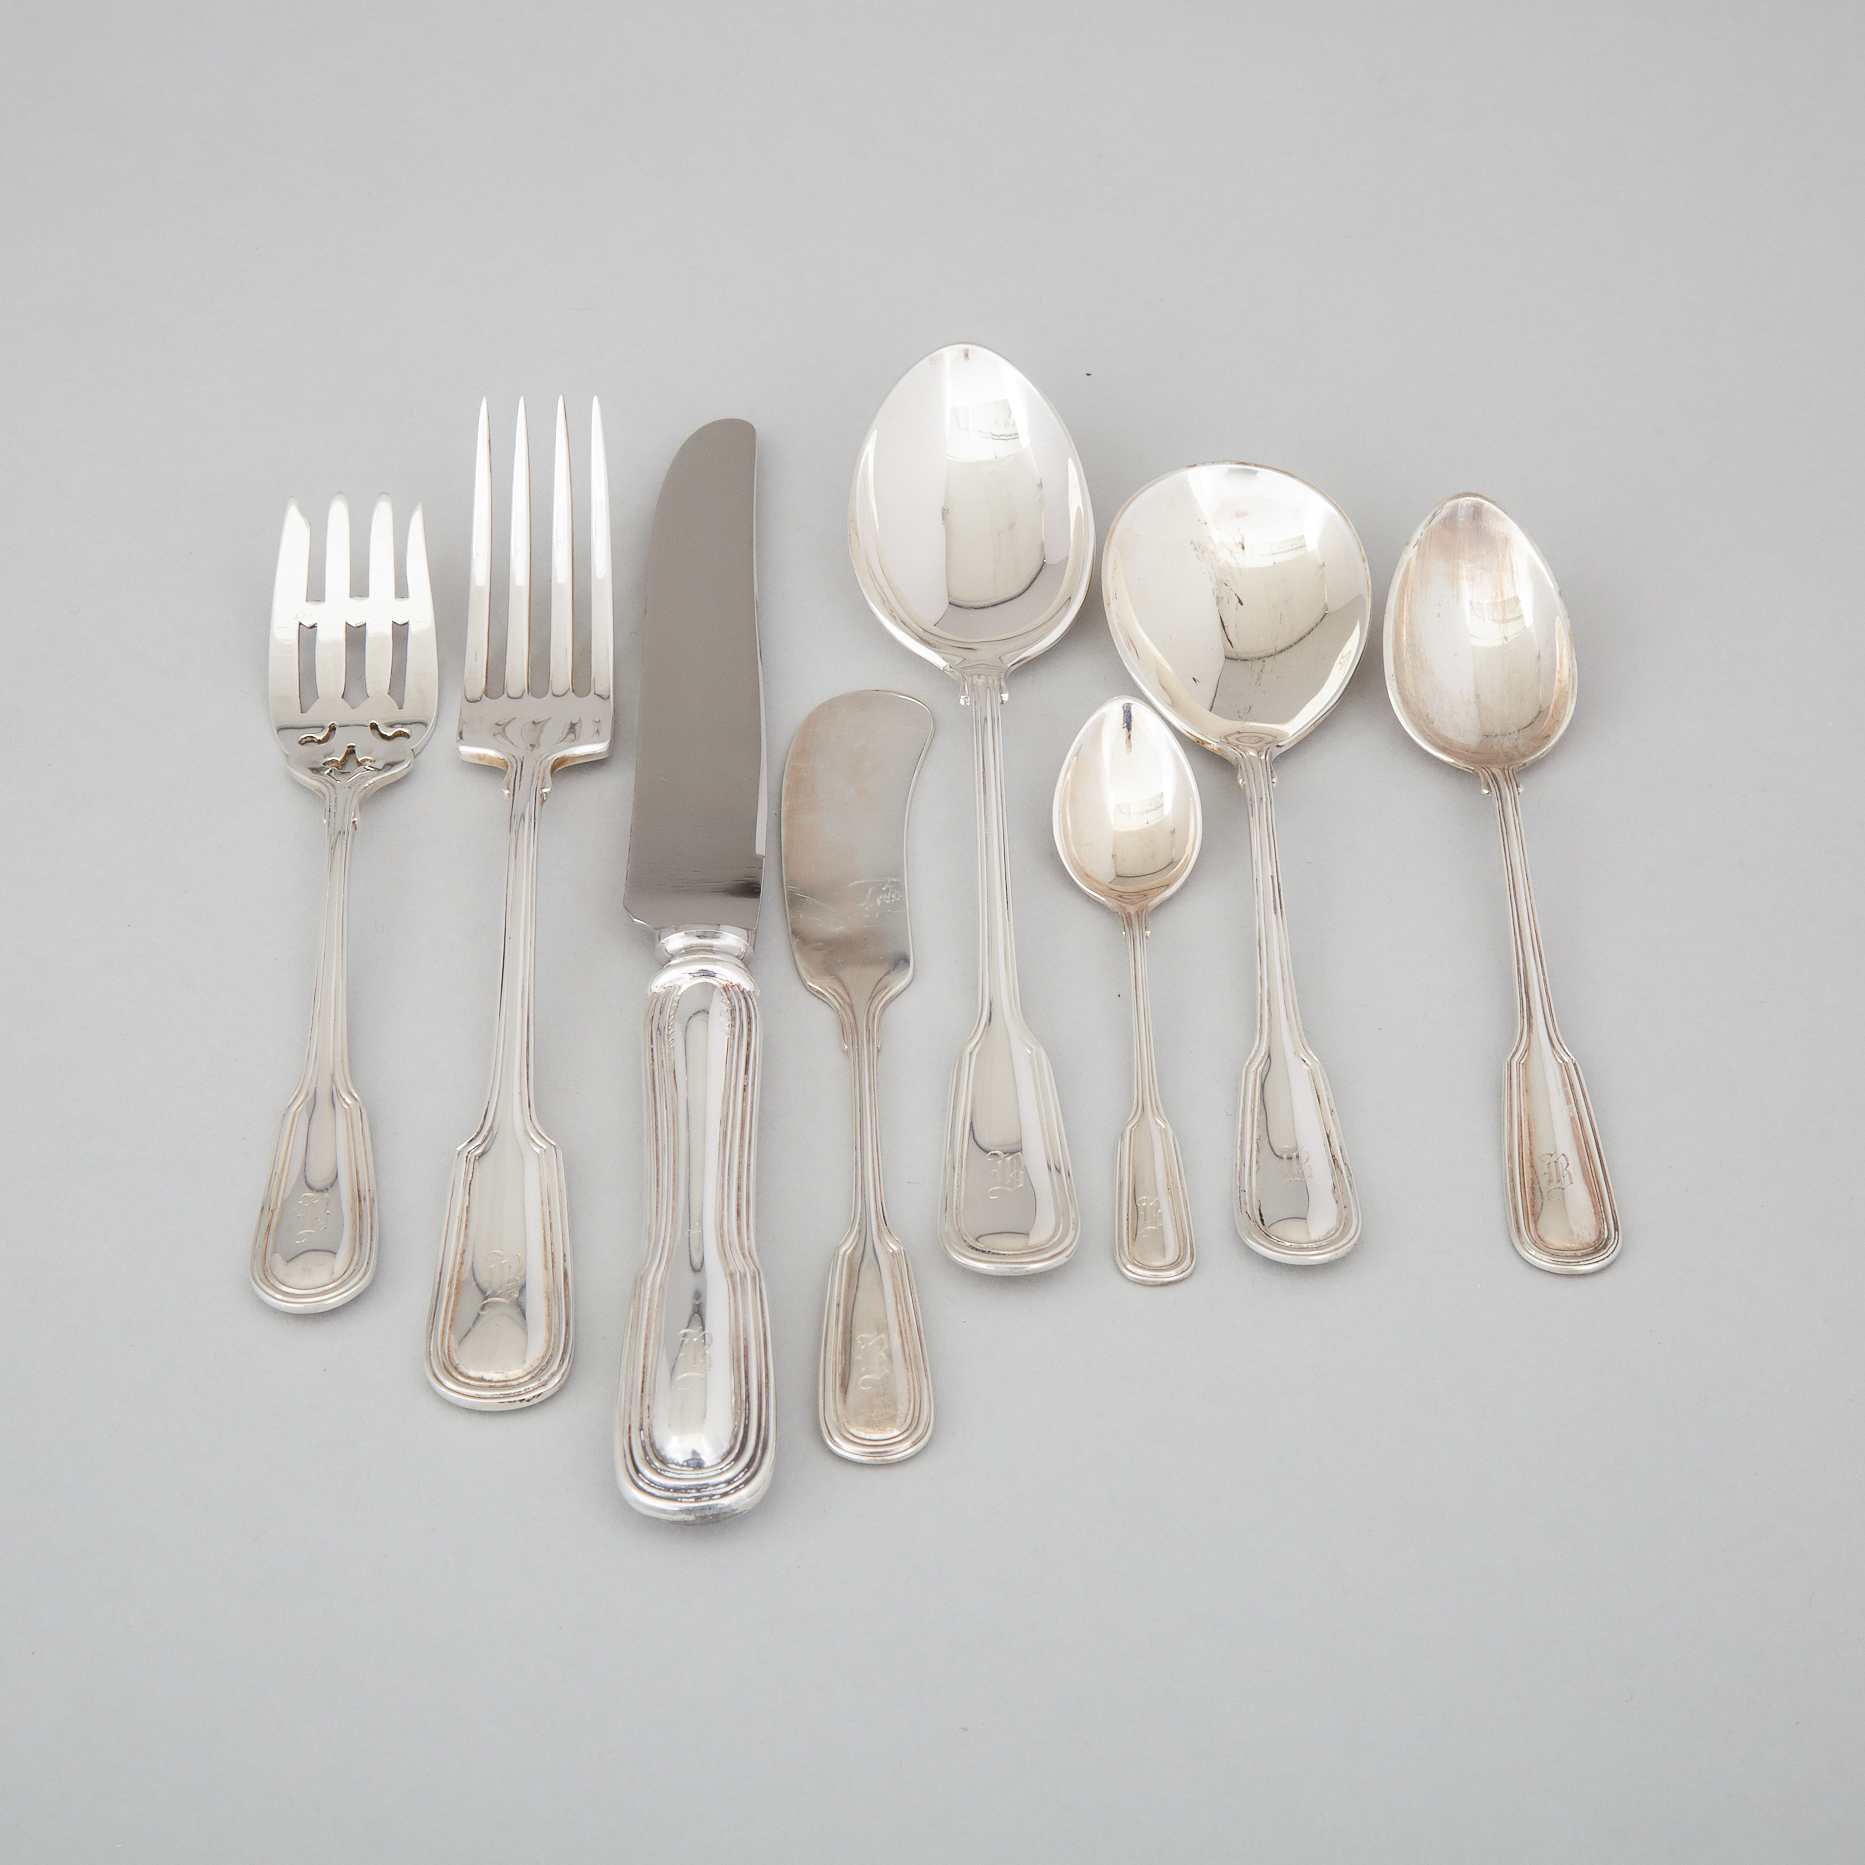 Canadian Silver Fiddle and Thread Pattern Flatware, J.E. Ellis & Co. and Roden Bros., Toronto, Ont., early 20th century